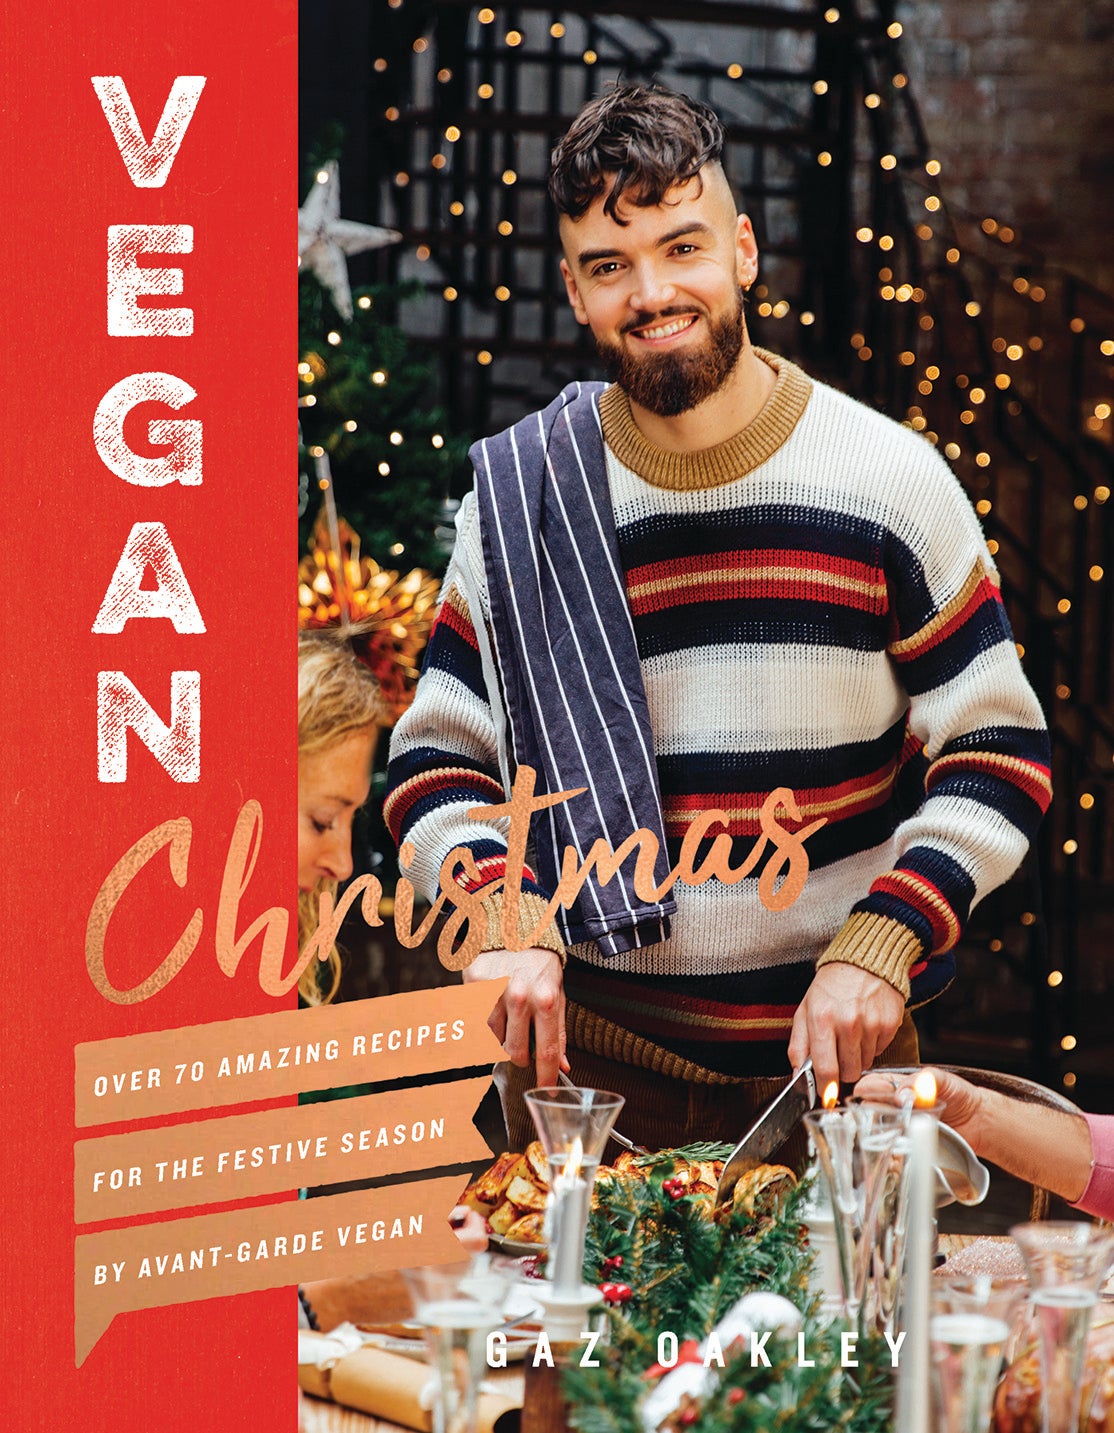 Gaz Oakley's Vegan Christmas book is the only fully plant-based Christmas recipe book in the UK and contains more than 70 recipes